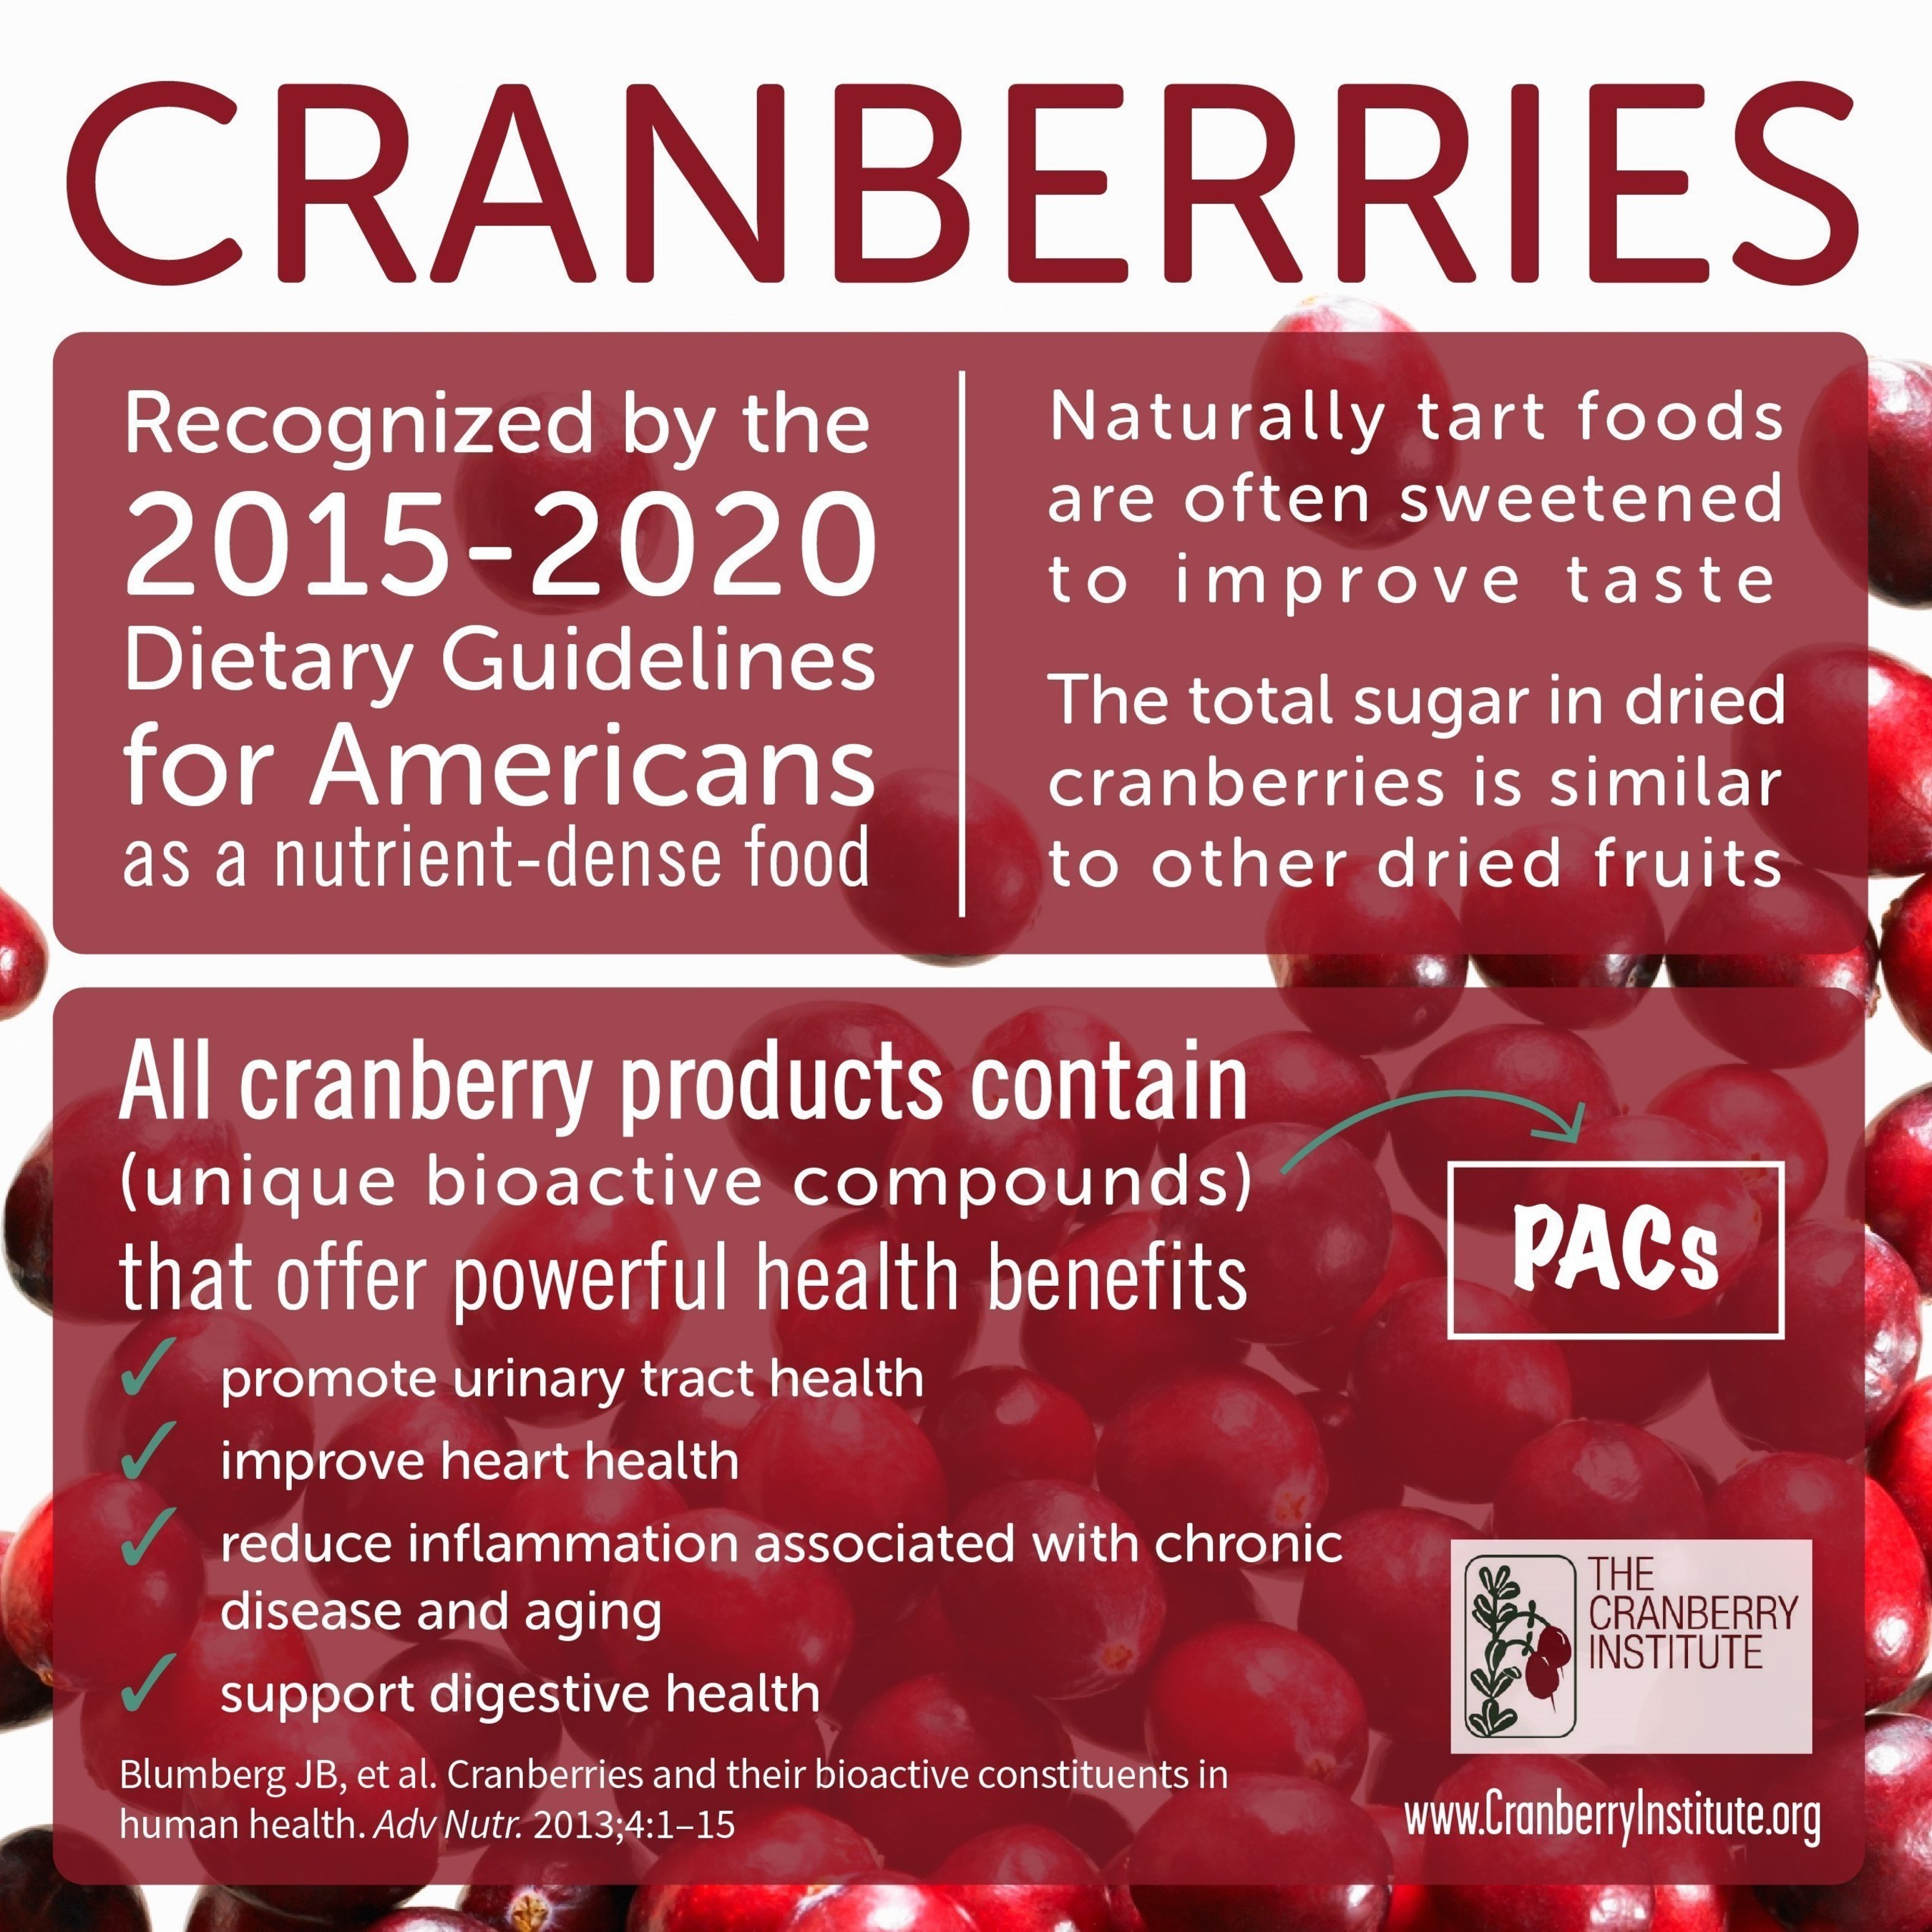 scientists agree that cranberry benefits may extend to the